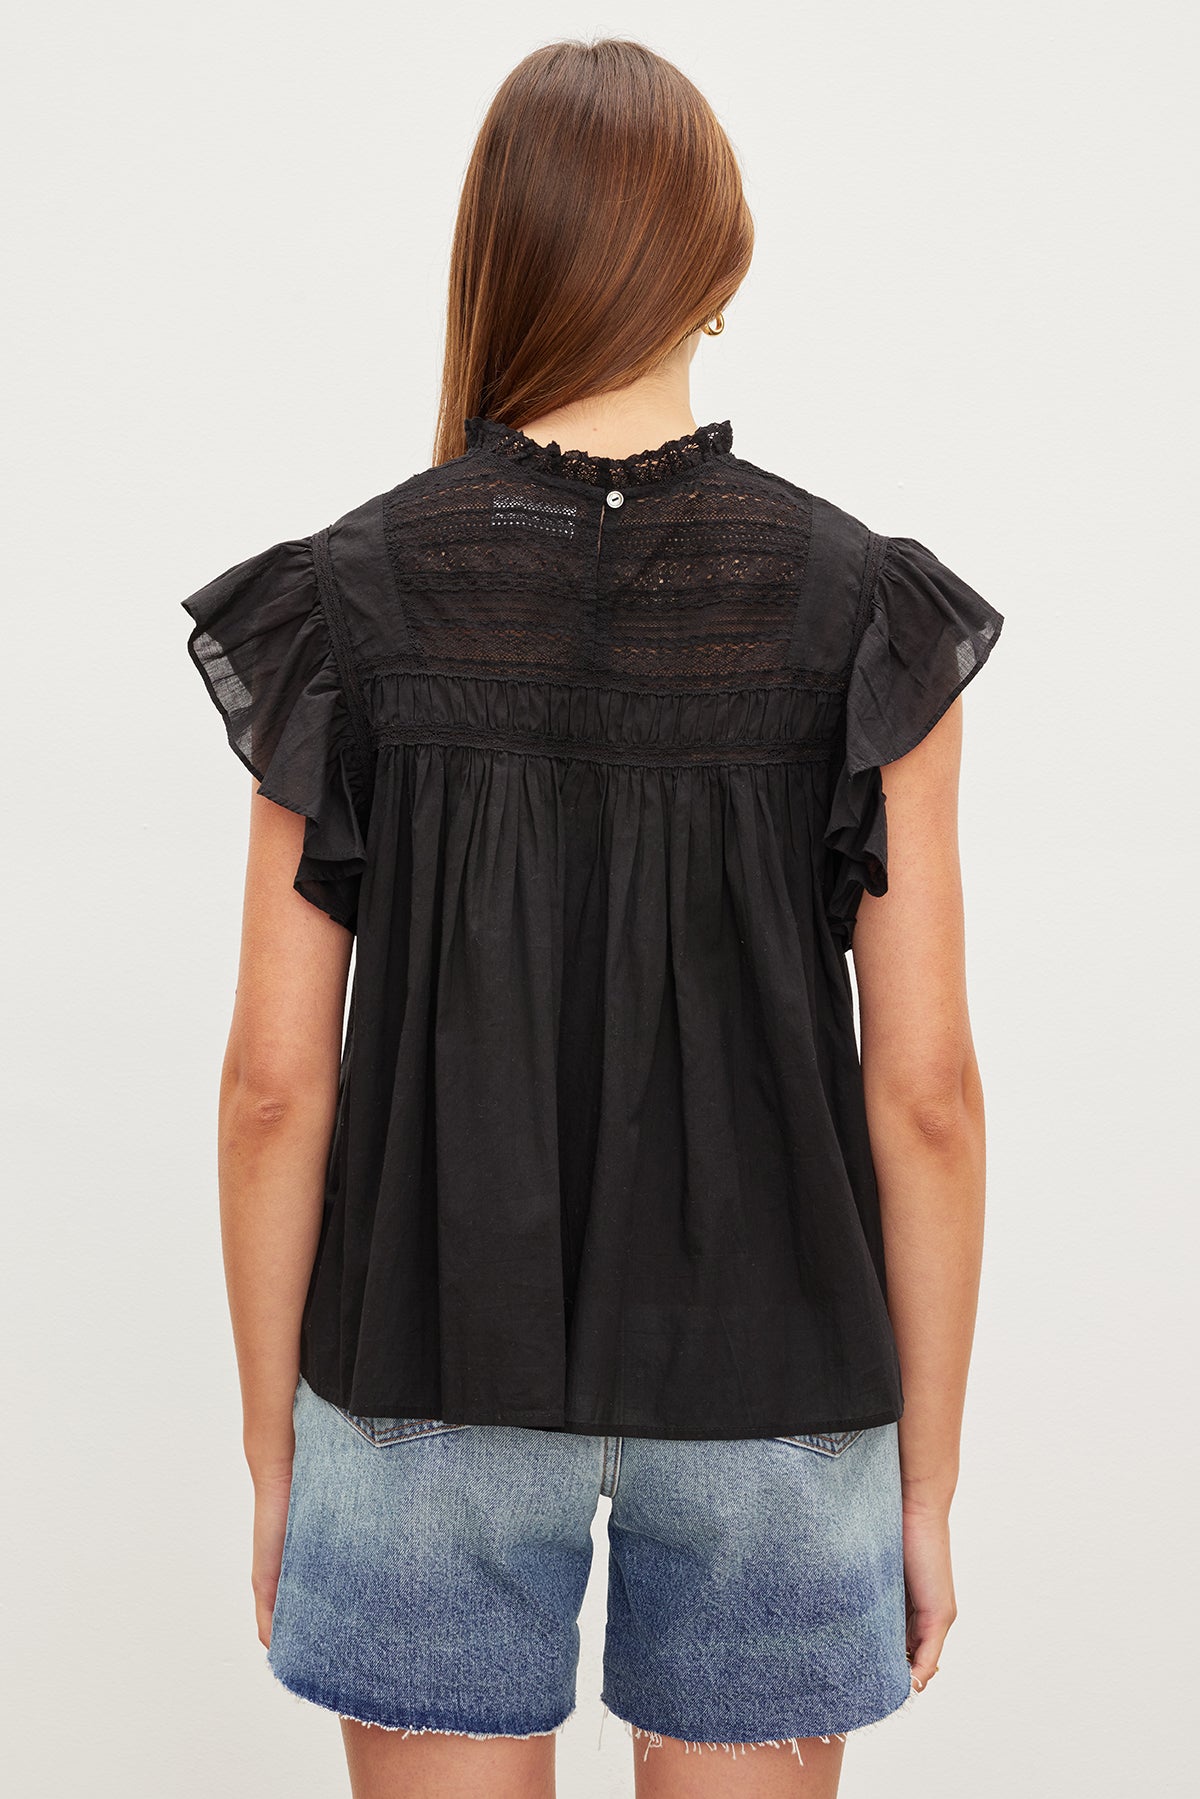 The back view of a woman wearing an INESSA COTTON LACE TOP by Velvet by Graham & Spencer with ruffled sleeves.-35967734317249